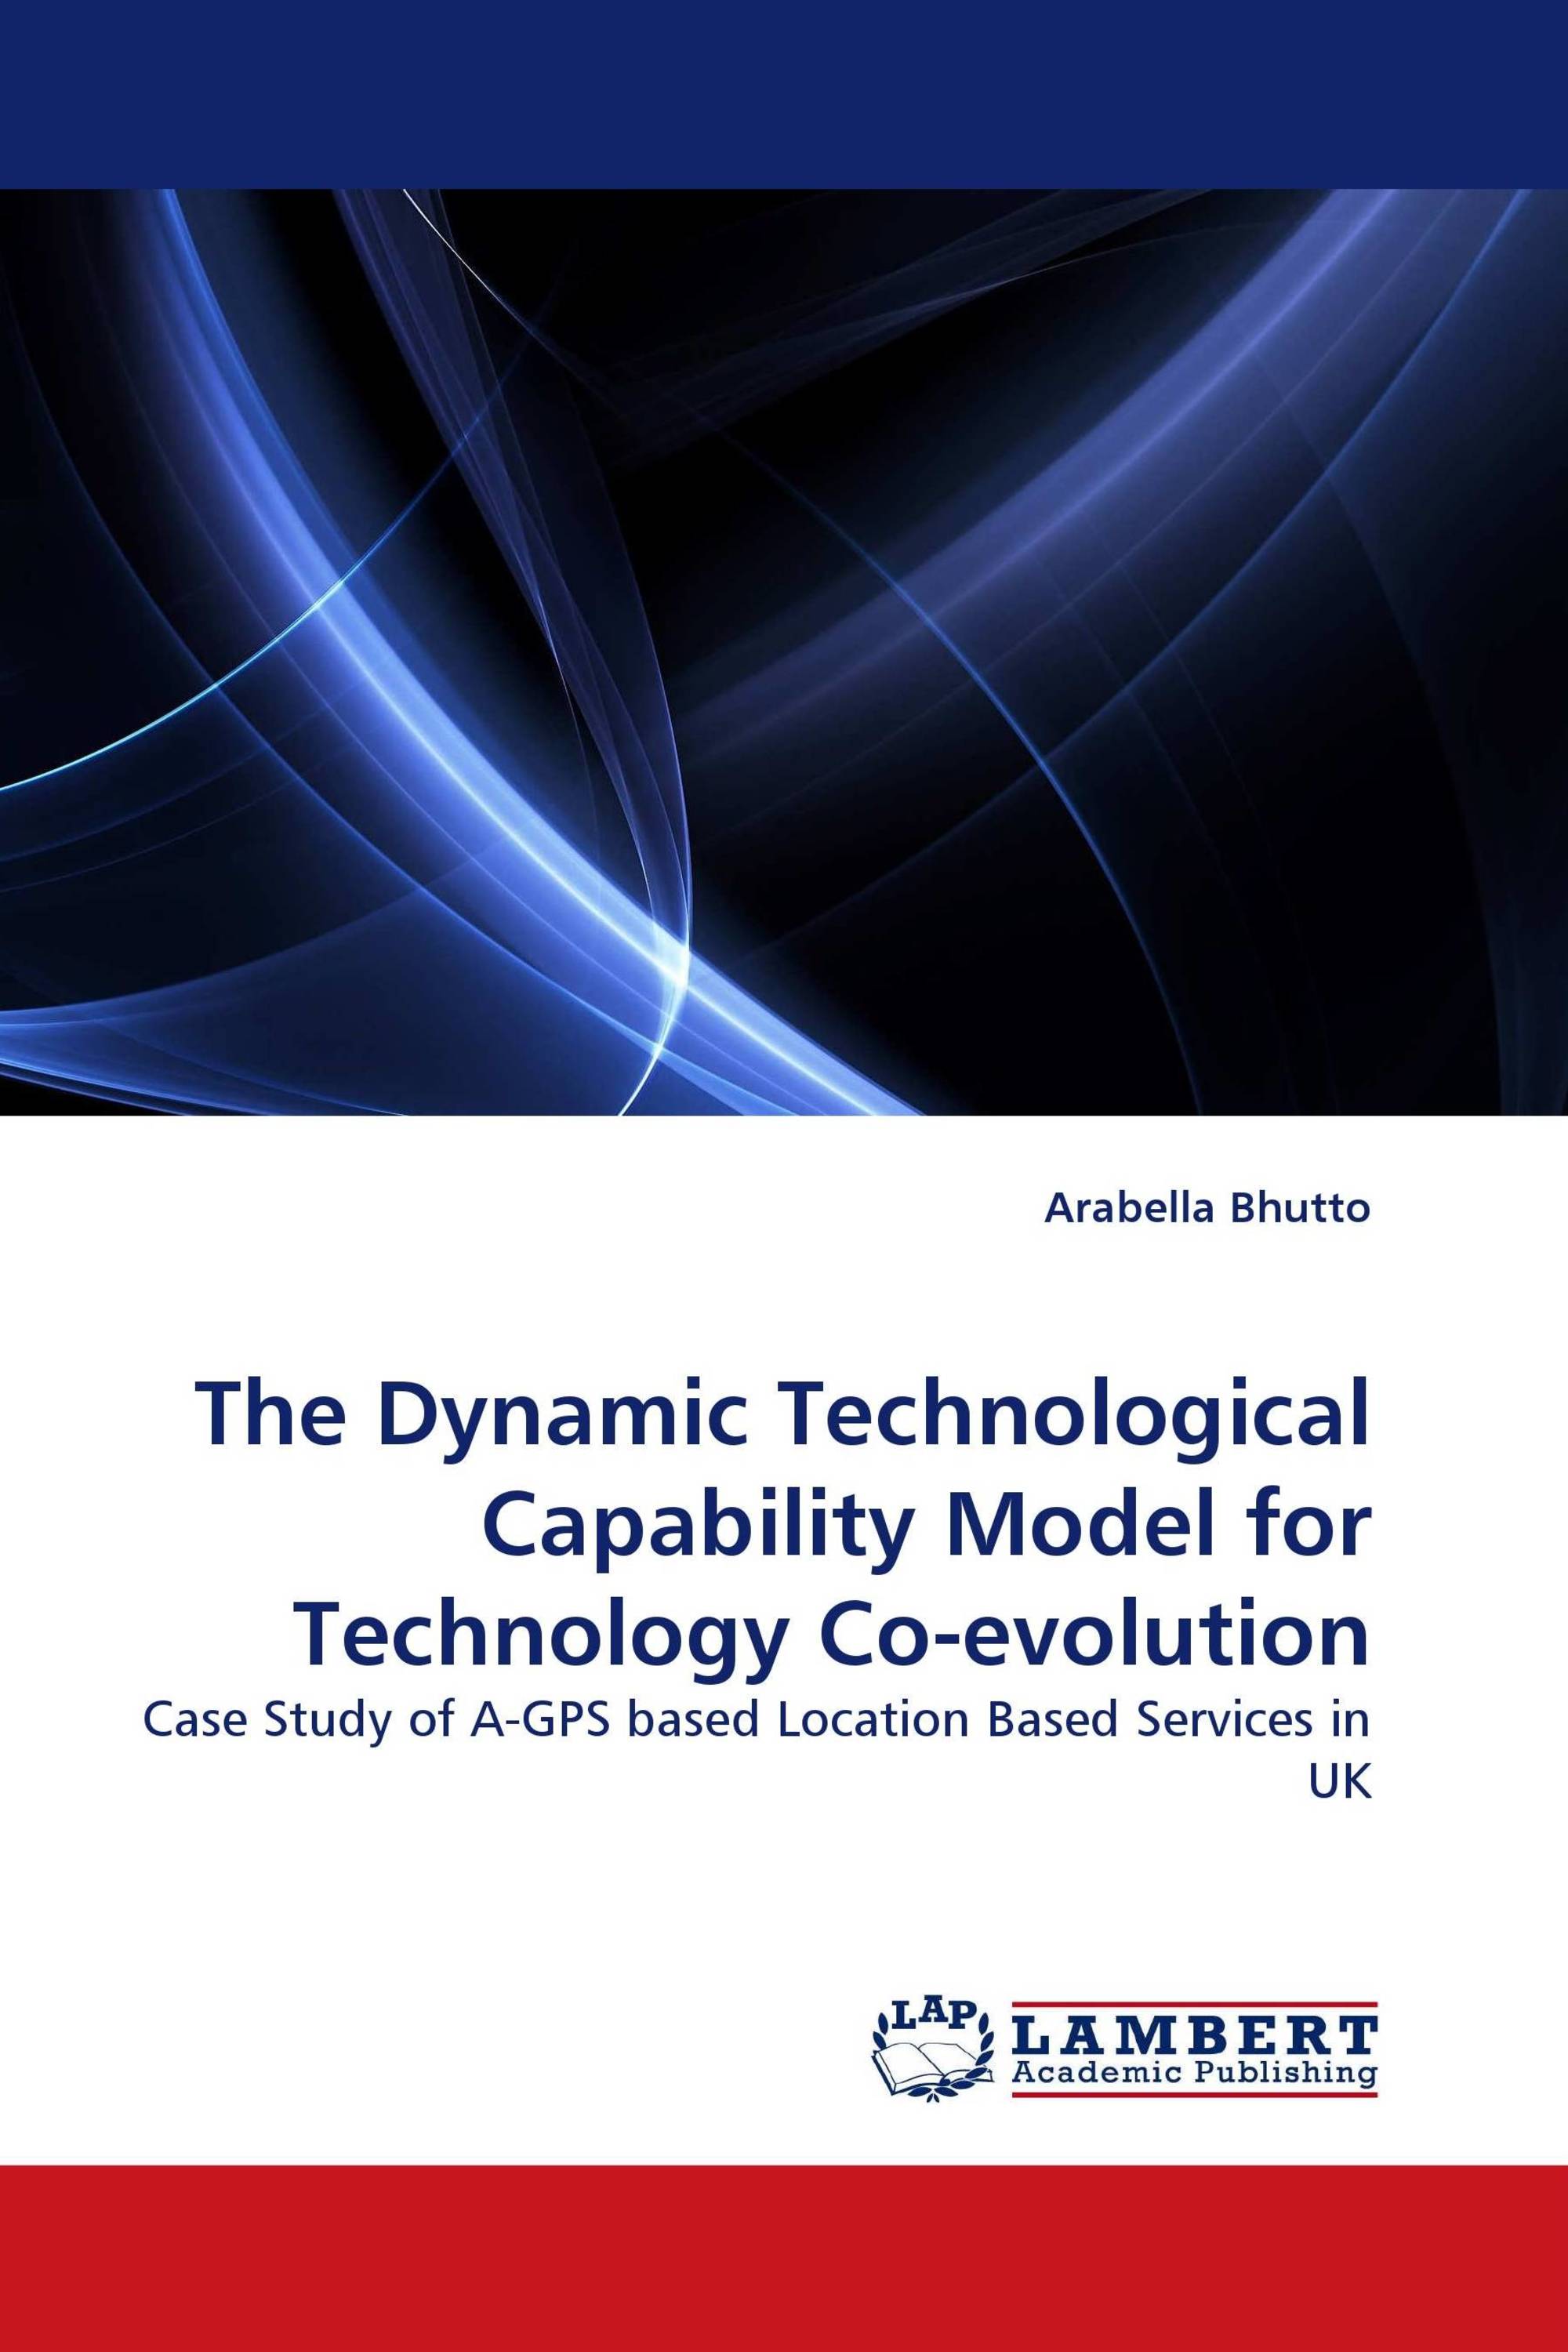 The Dynamic Technological Capability Model for Technology Co-evolution